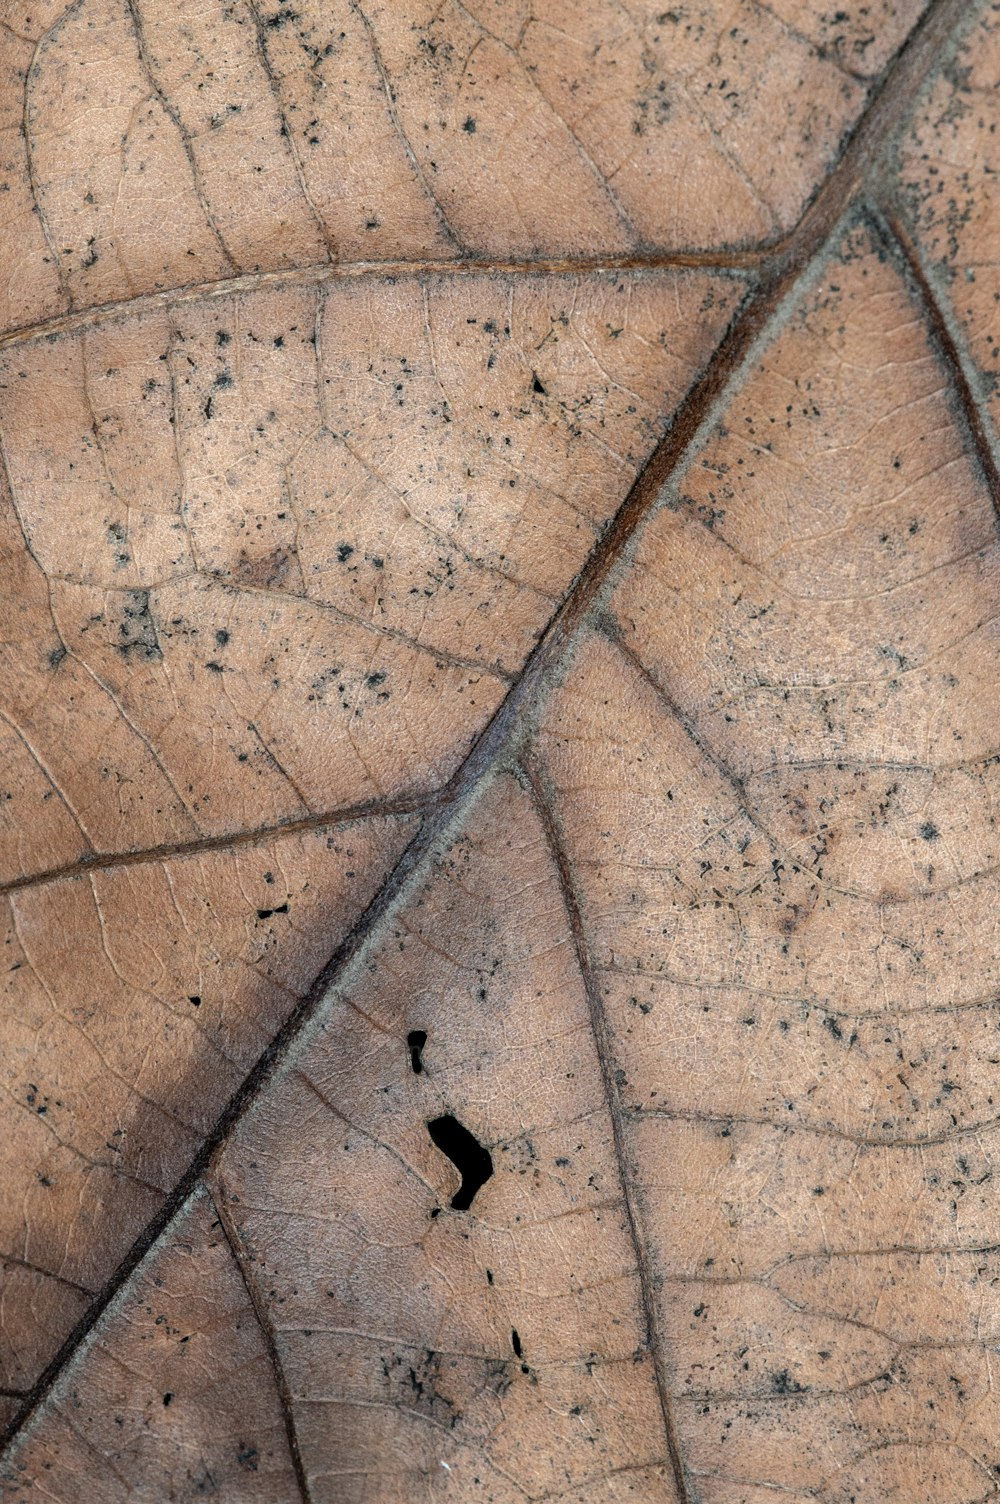 a close up of a brown leaf with black spots